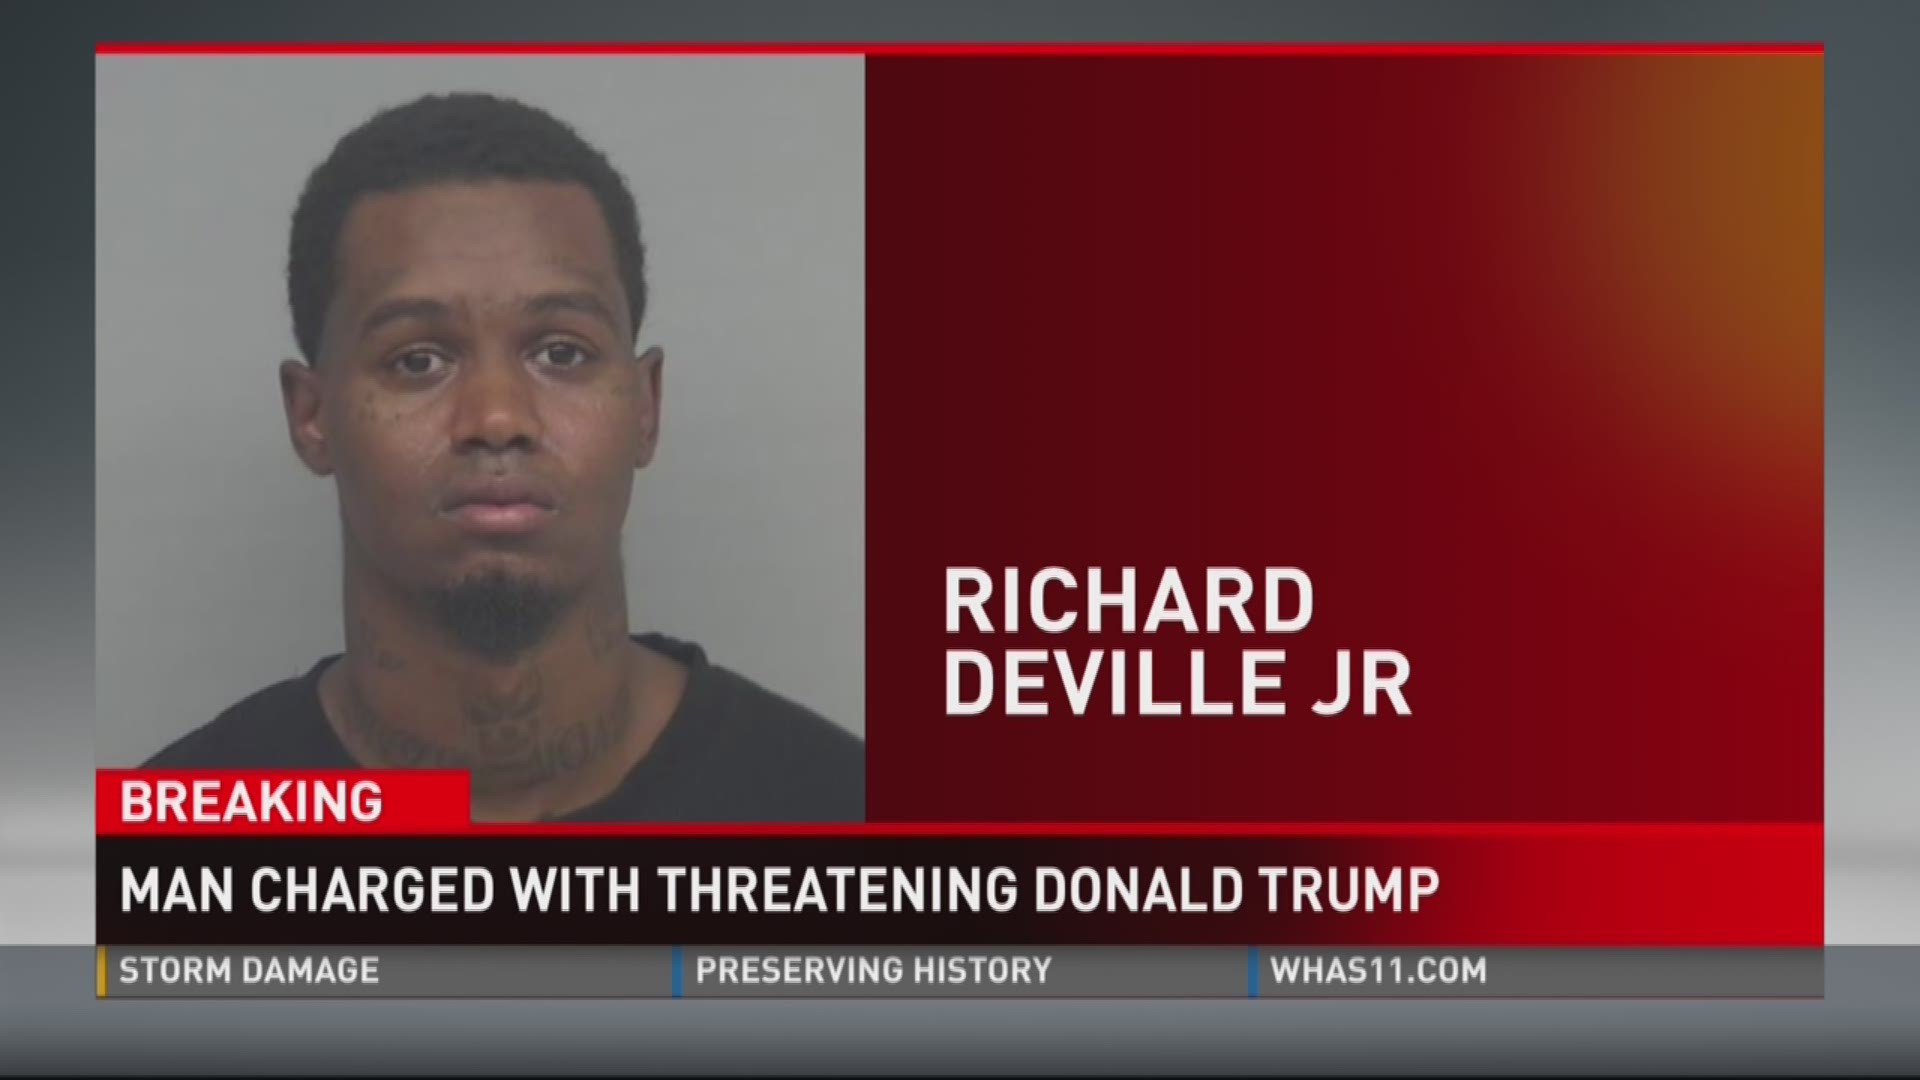 Man charged with threatening Donald Trump